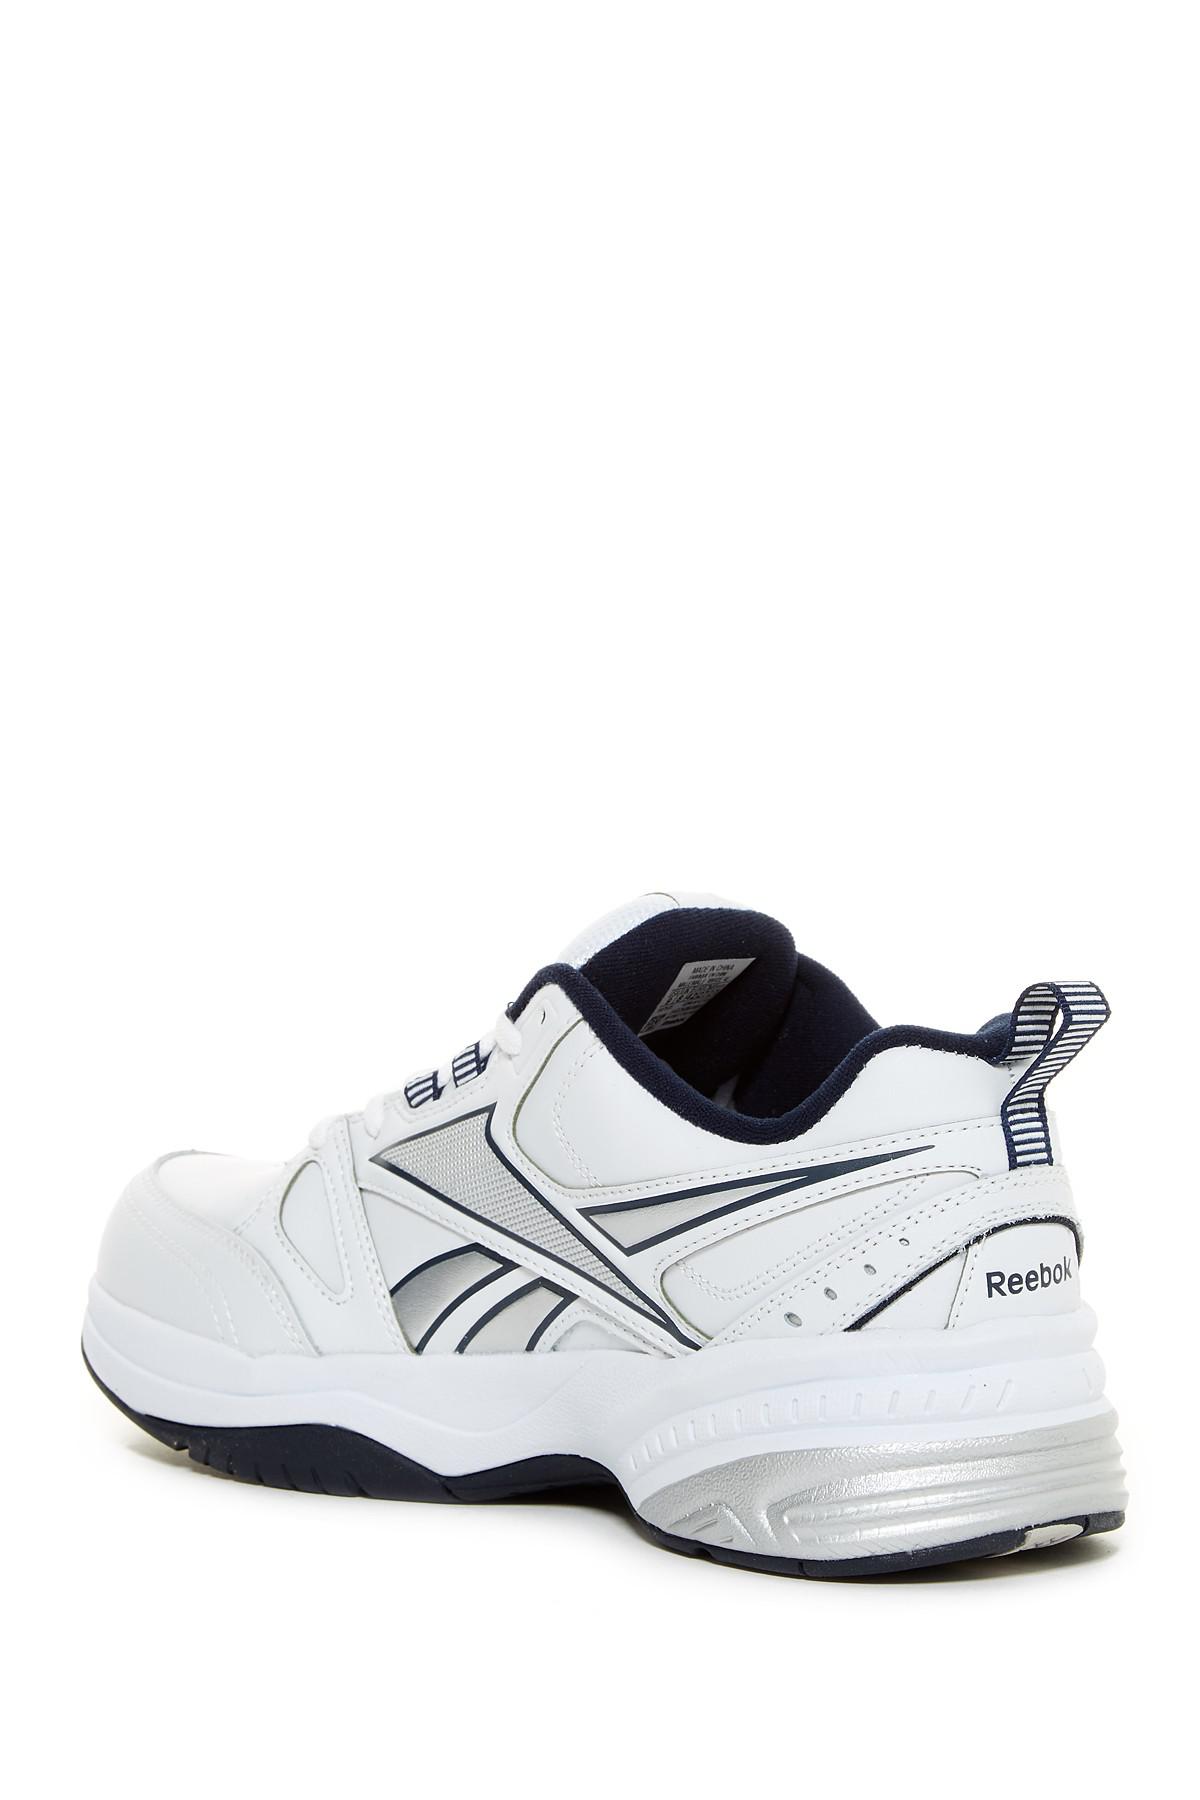 Reebok Leather Royal Trainer Xwide 4e Athletic Sneaker - Extra Wide Width  for Men - Lyst